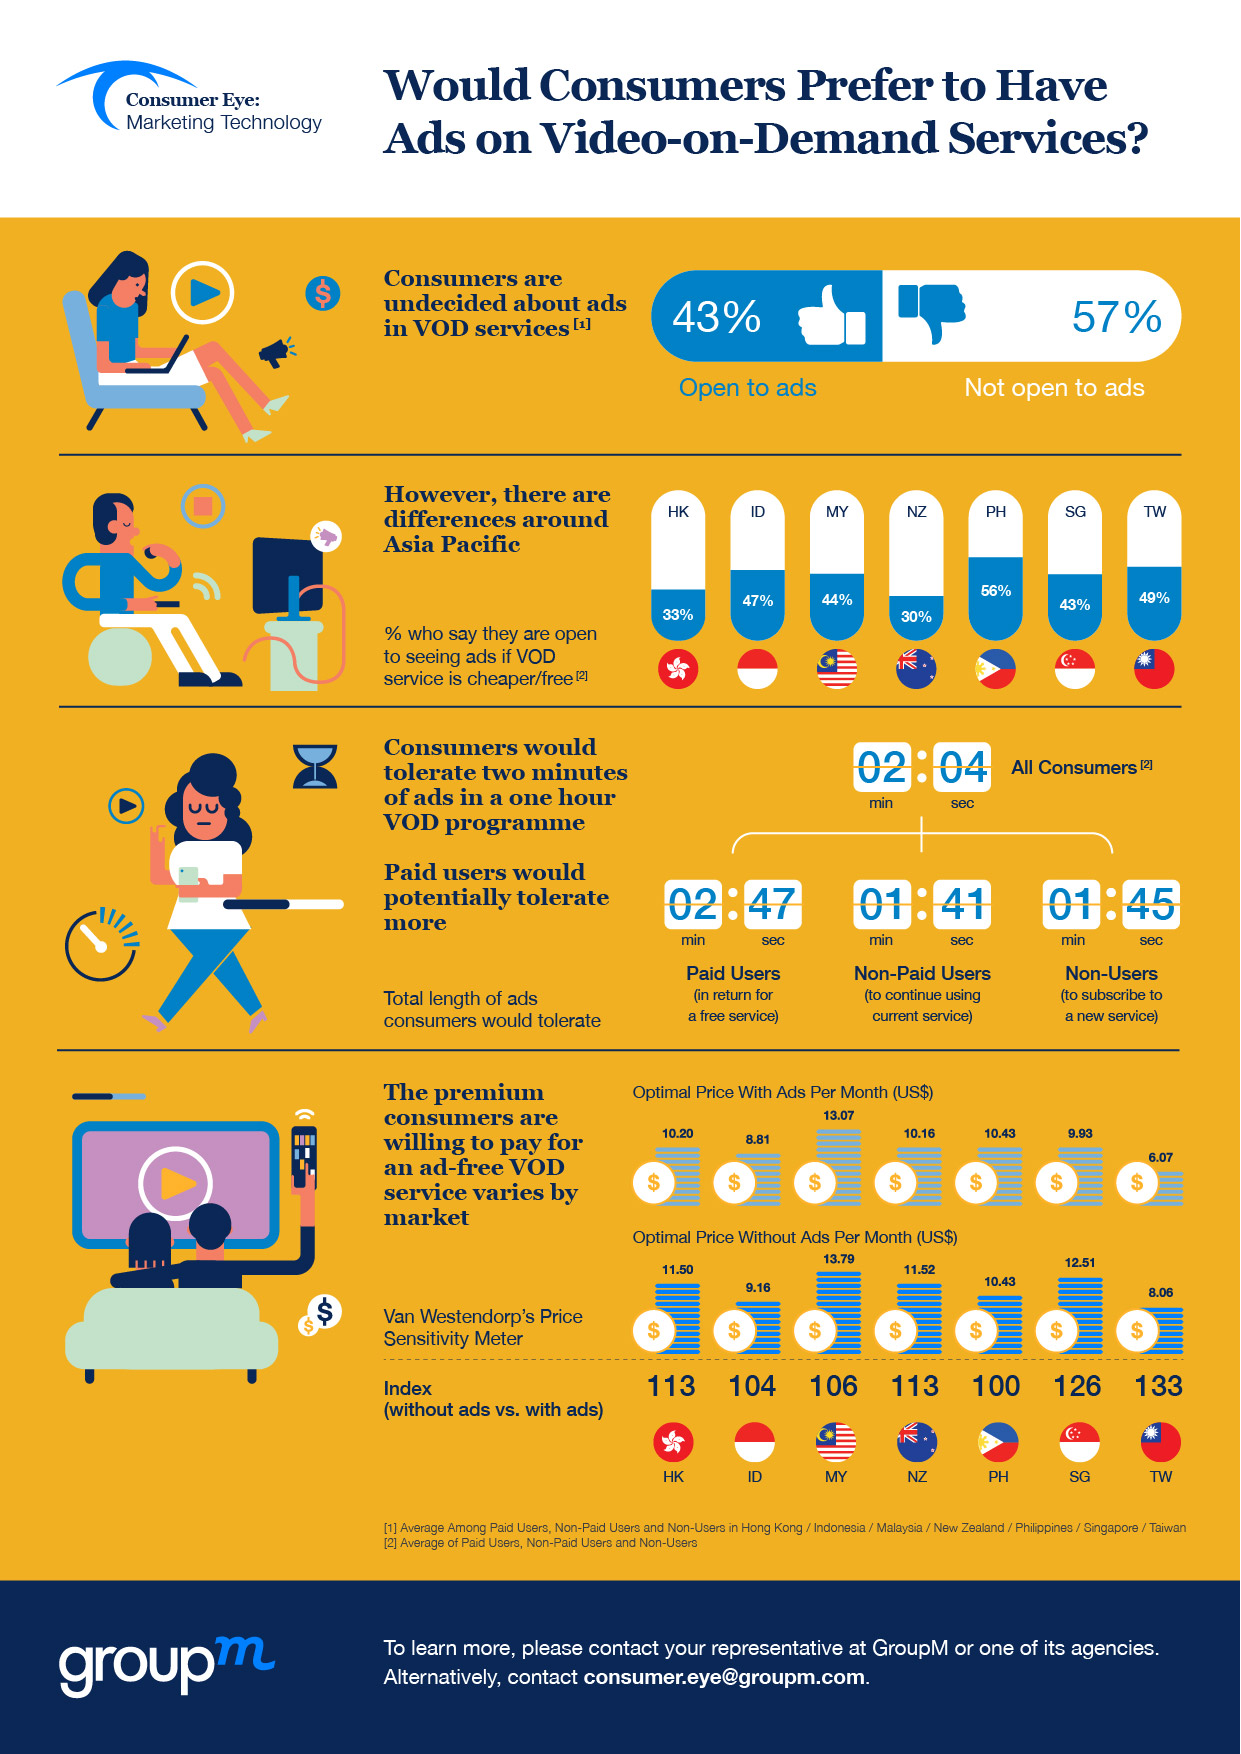 World Consumers Prefer to Have Ads on Video-on-Demand Services?